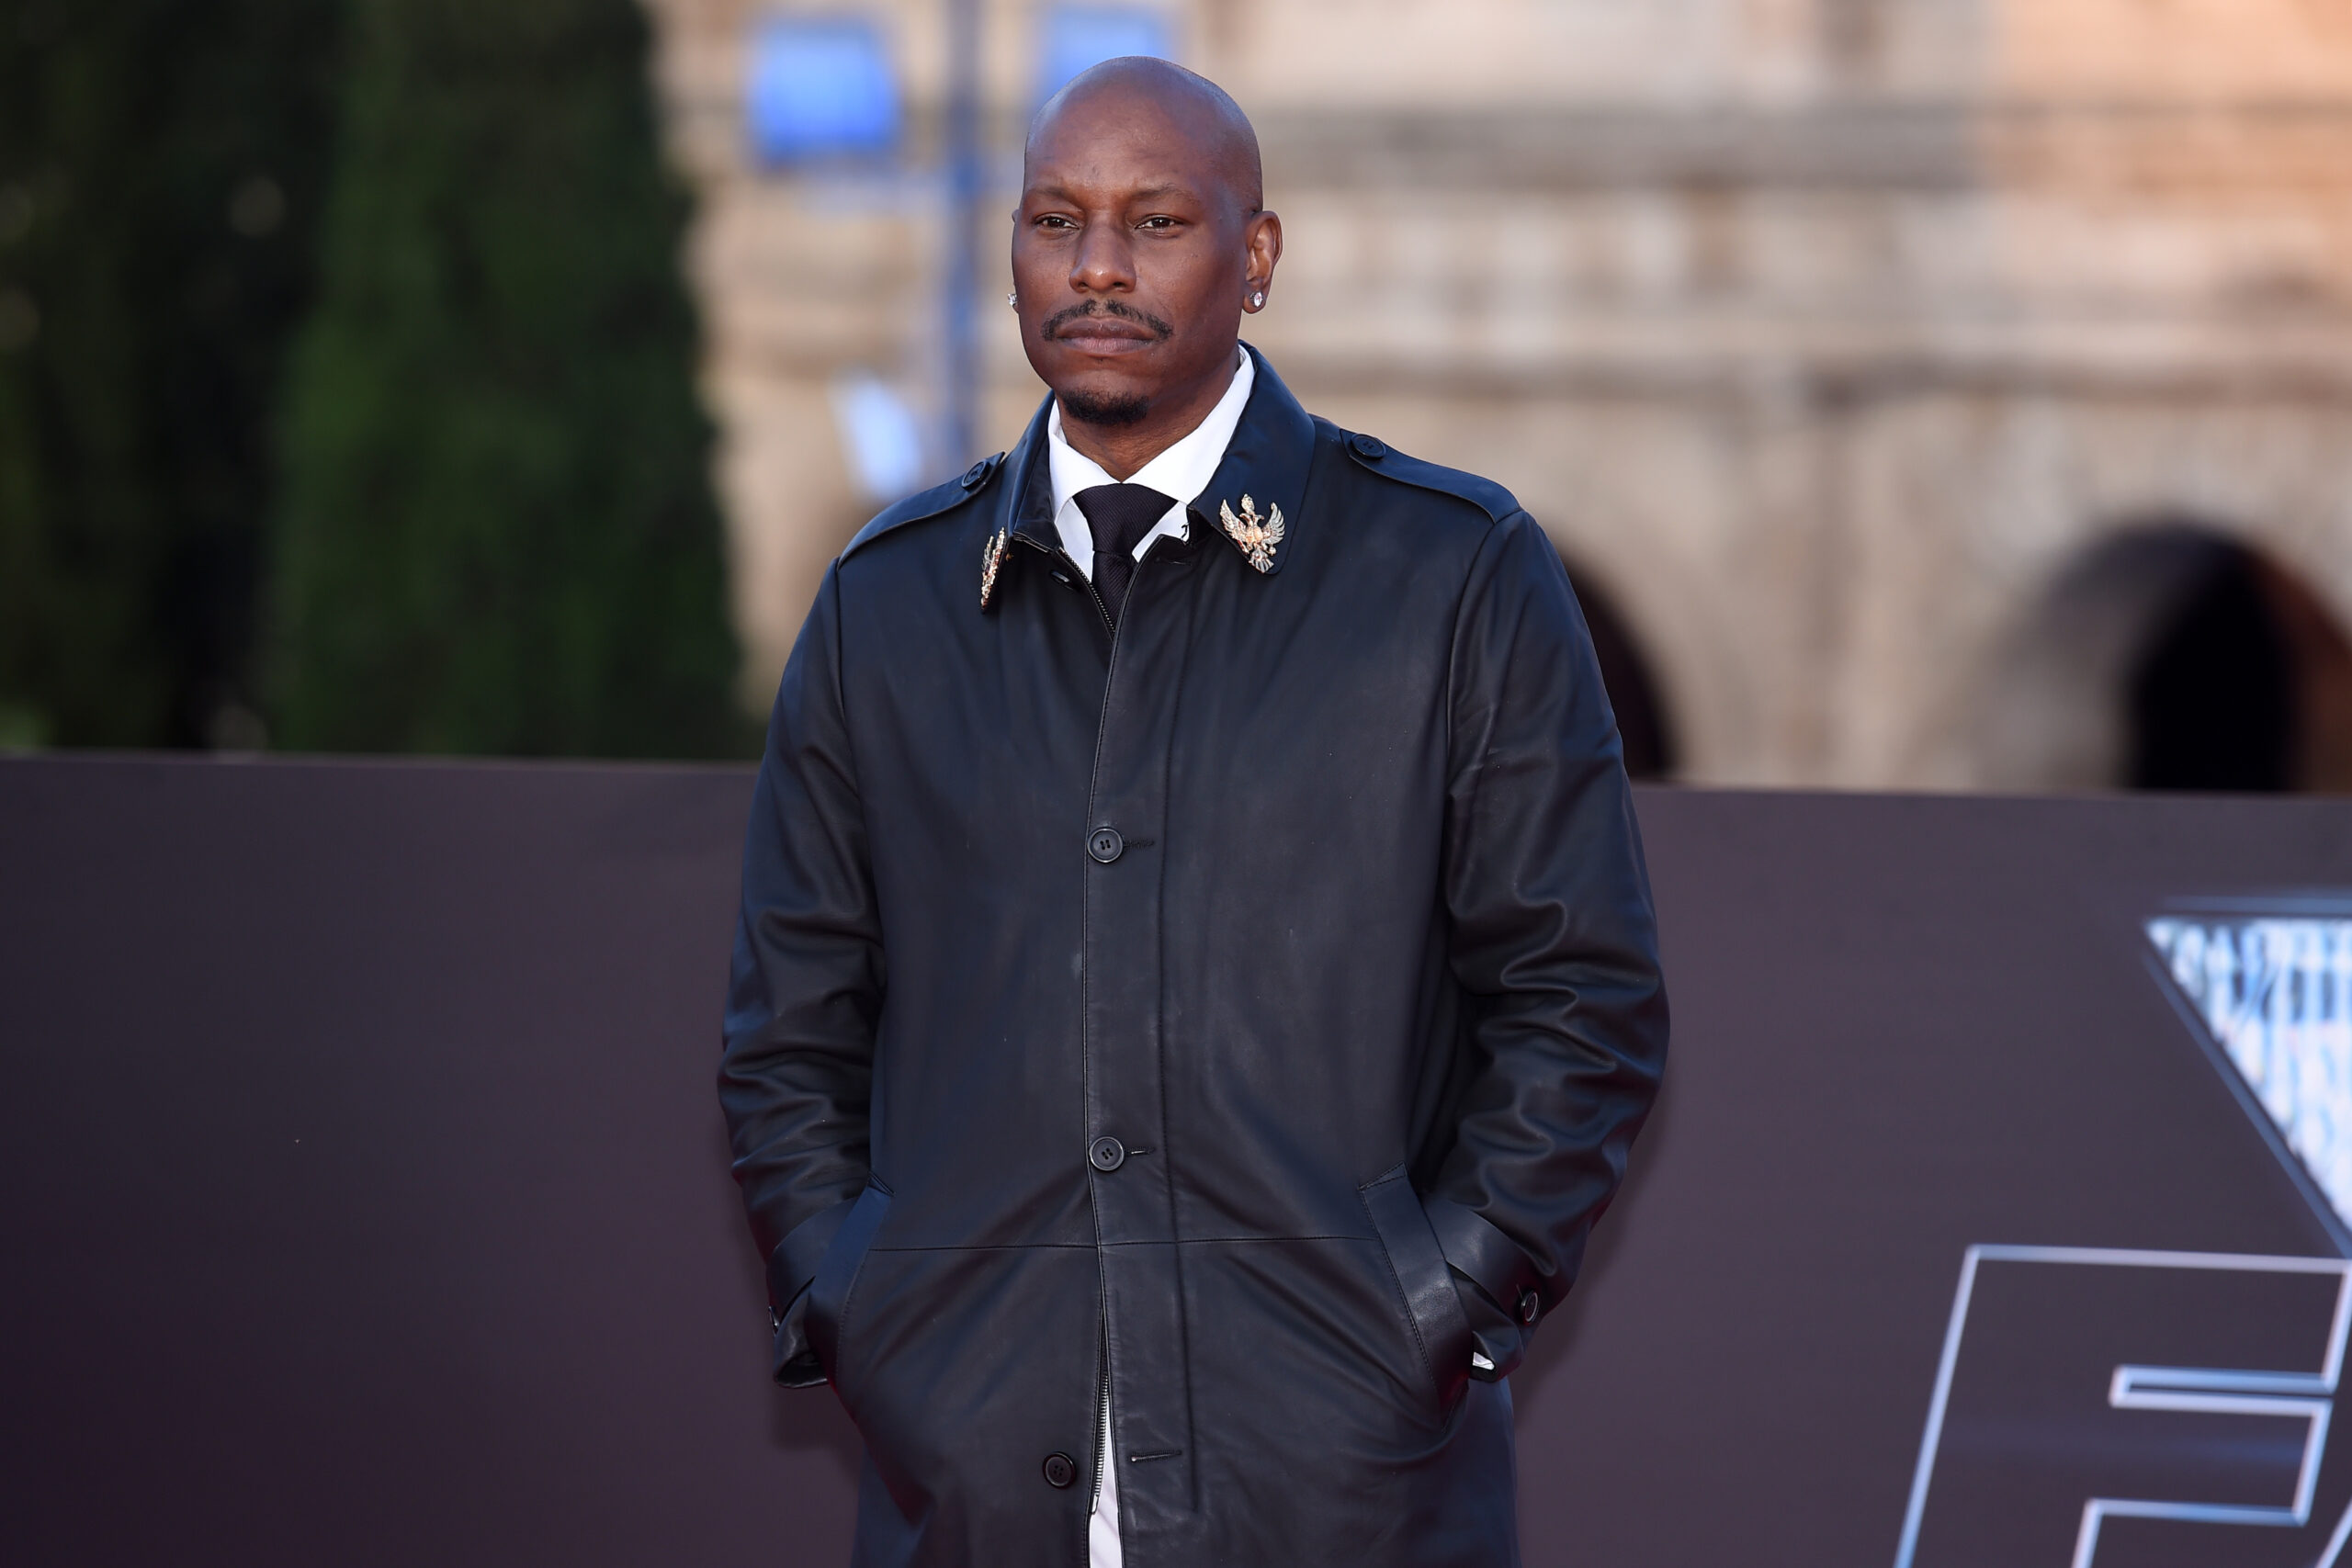 Tyrese Puts DJ Envy Feud To Rest: “I’m Throwing Up My Peace Flag”